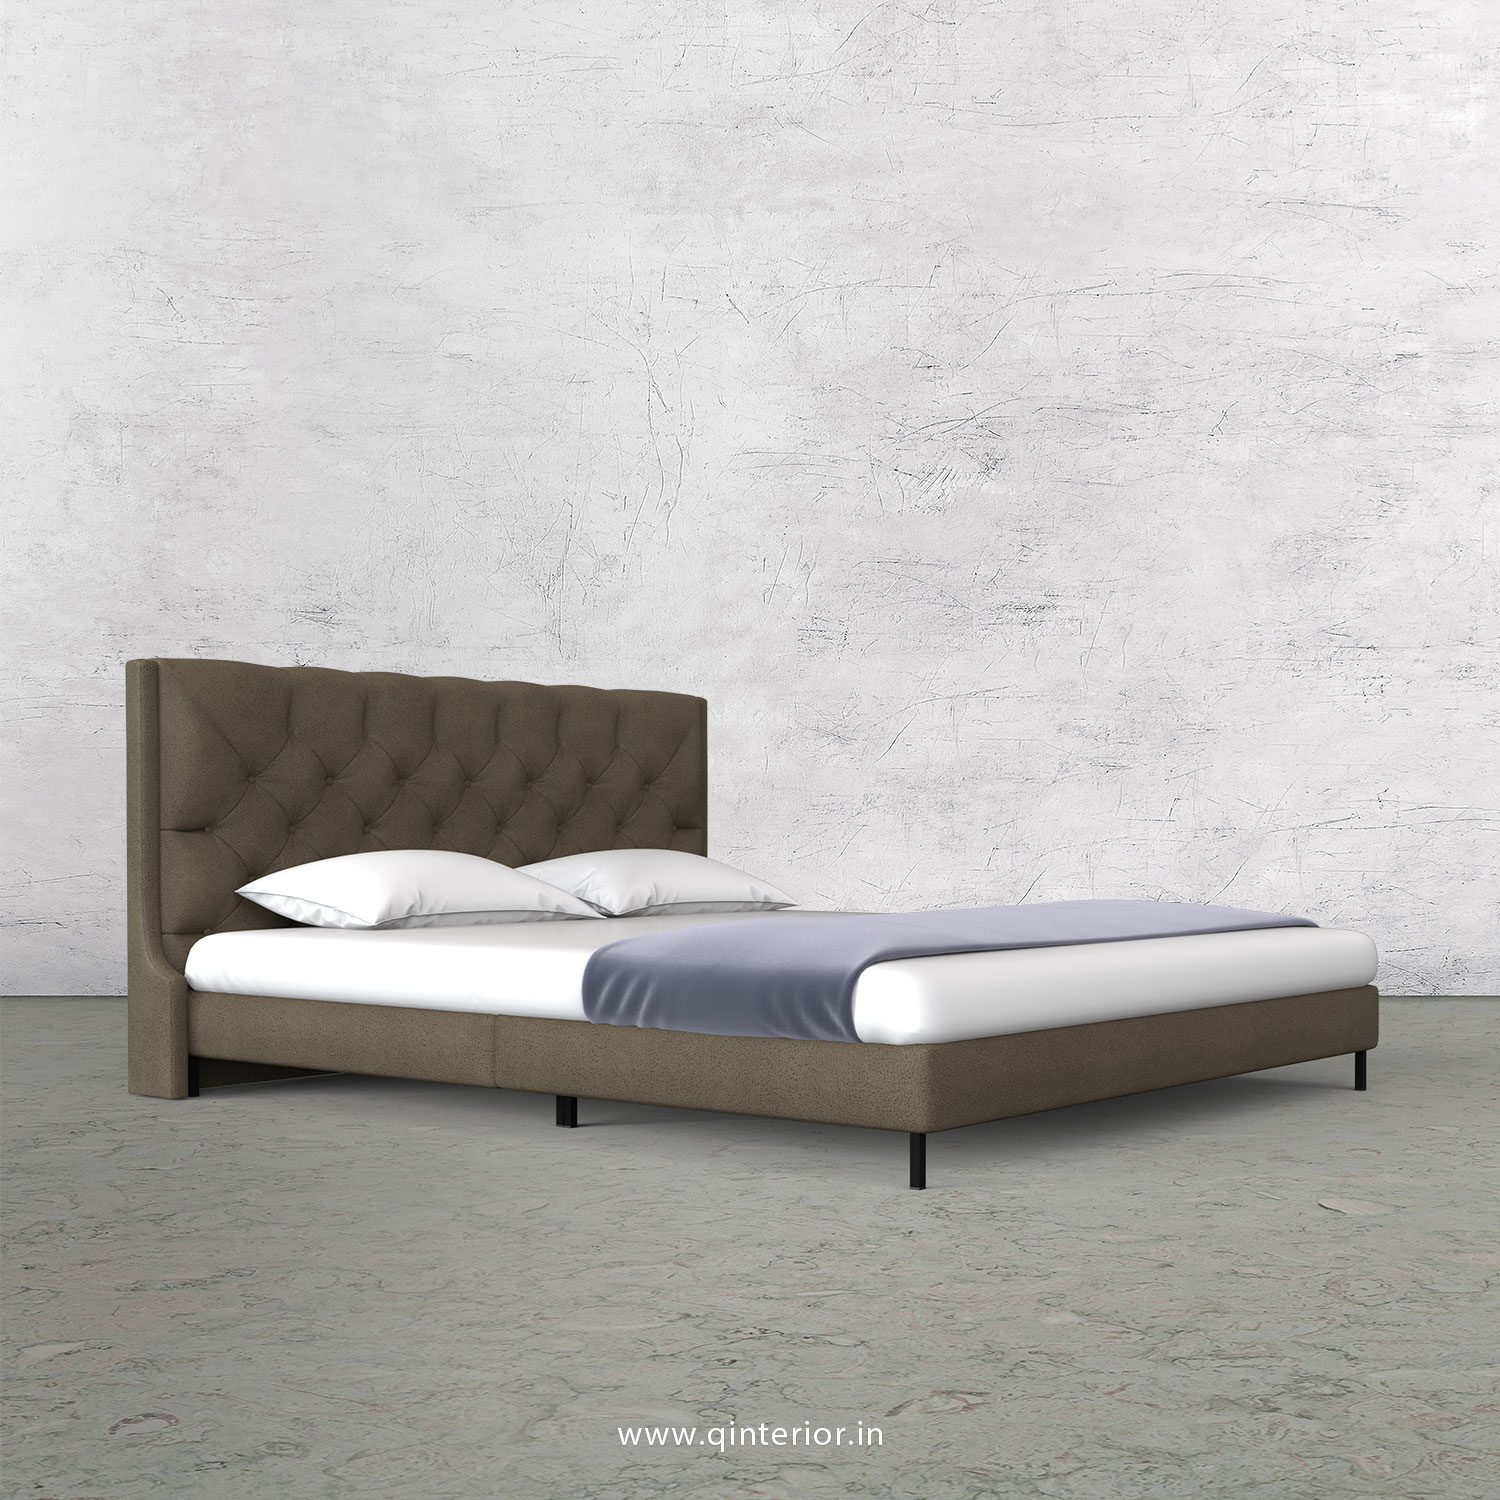 Scorpius Queen Size Bed with Fab Leather Fabric - QBD003 FL06